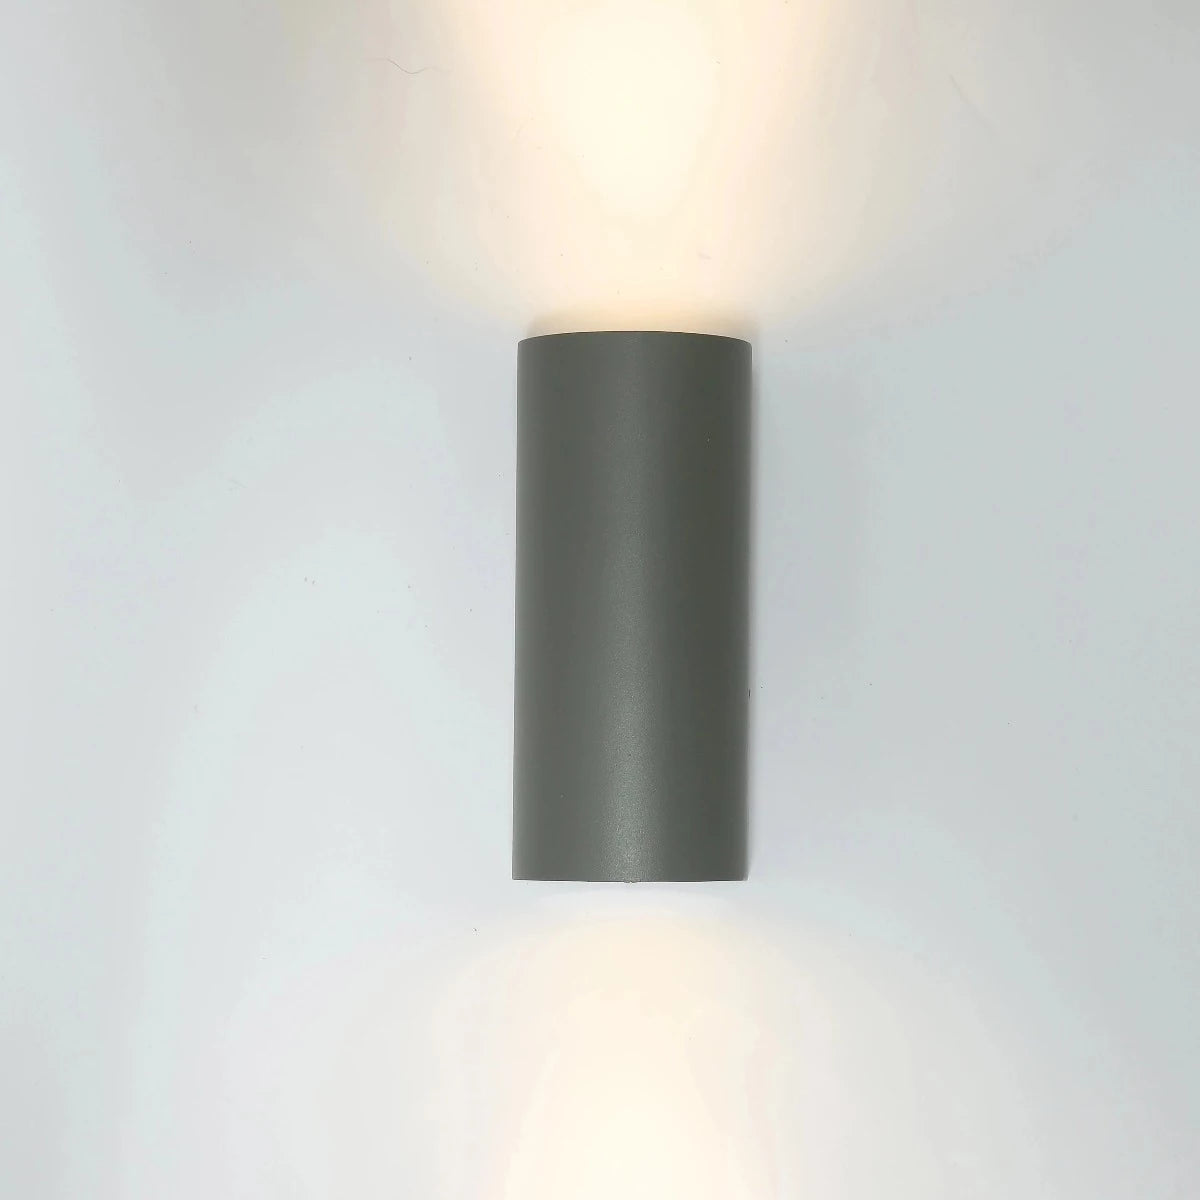 Cylinder wall light in action